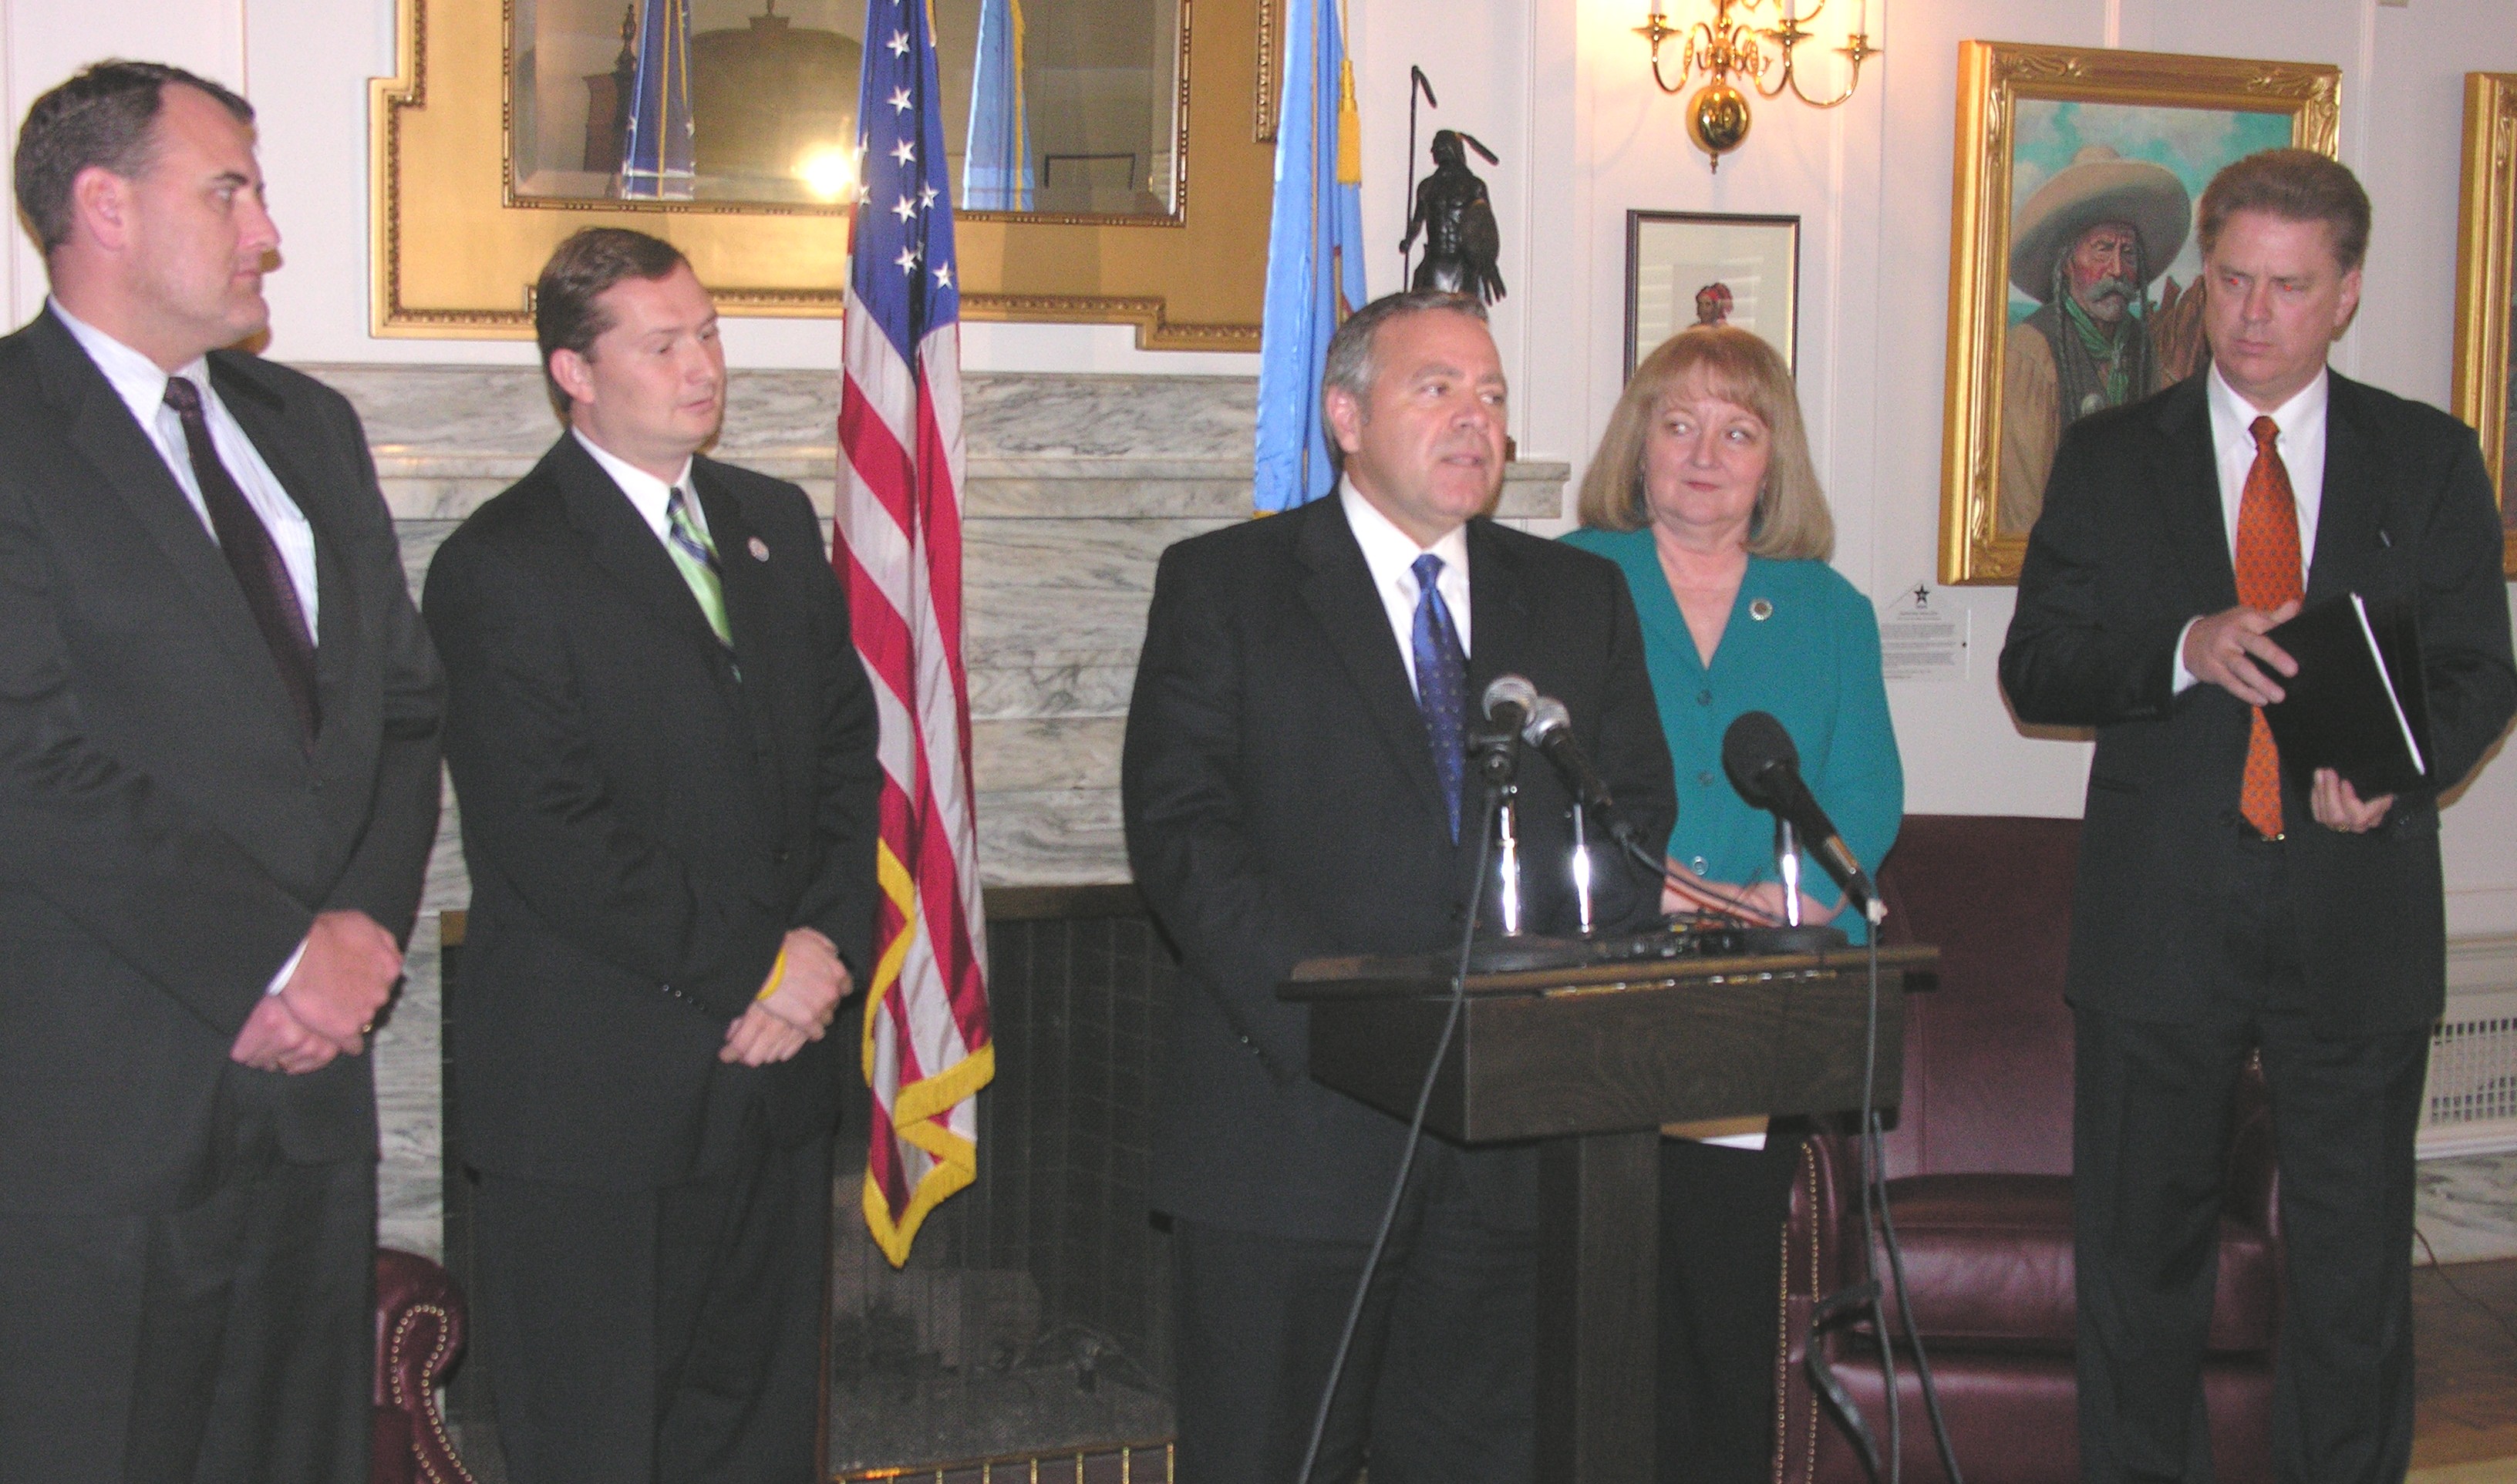 President Pro Tempore Mike Morgan, with senators John Sparks, Kenneth Corn, Debbe Leftwich and Charles Laster, presents the Senate Democrats' agenda for the 2008 session.